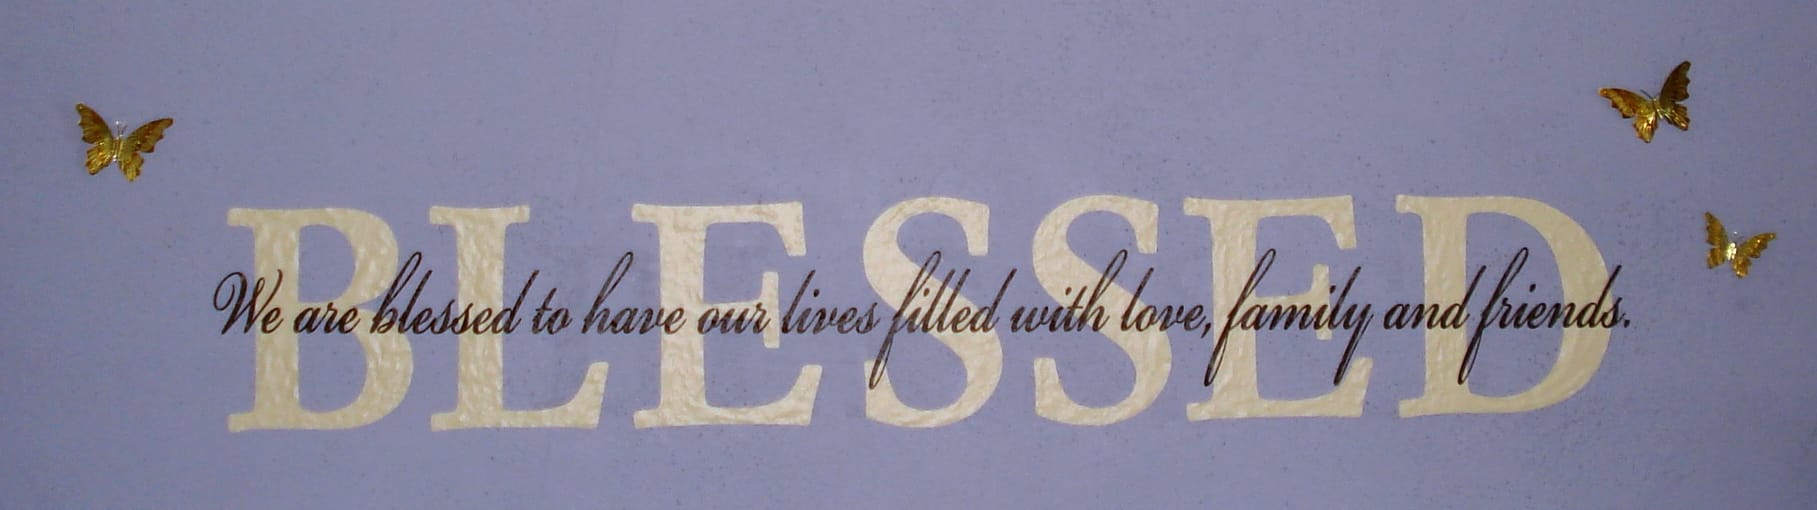 Blessed Wall Graphic with blue background